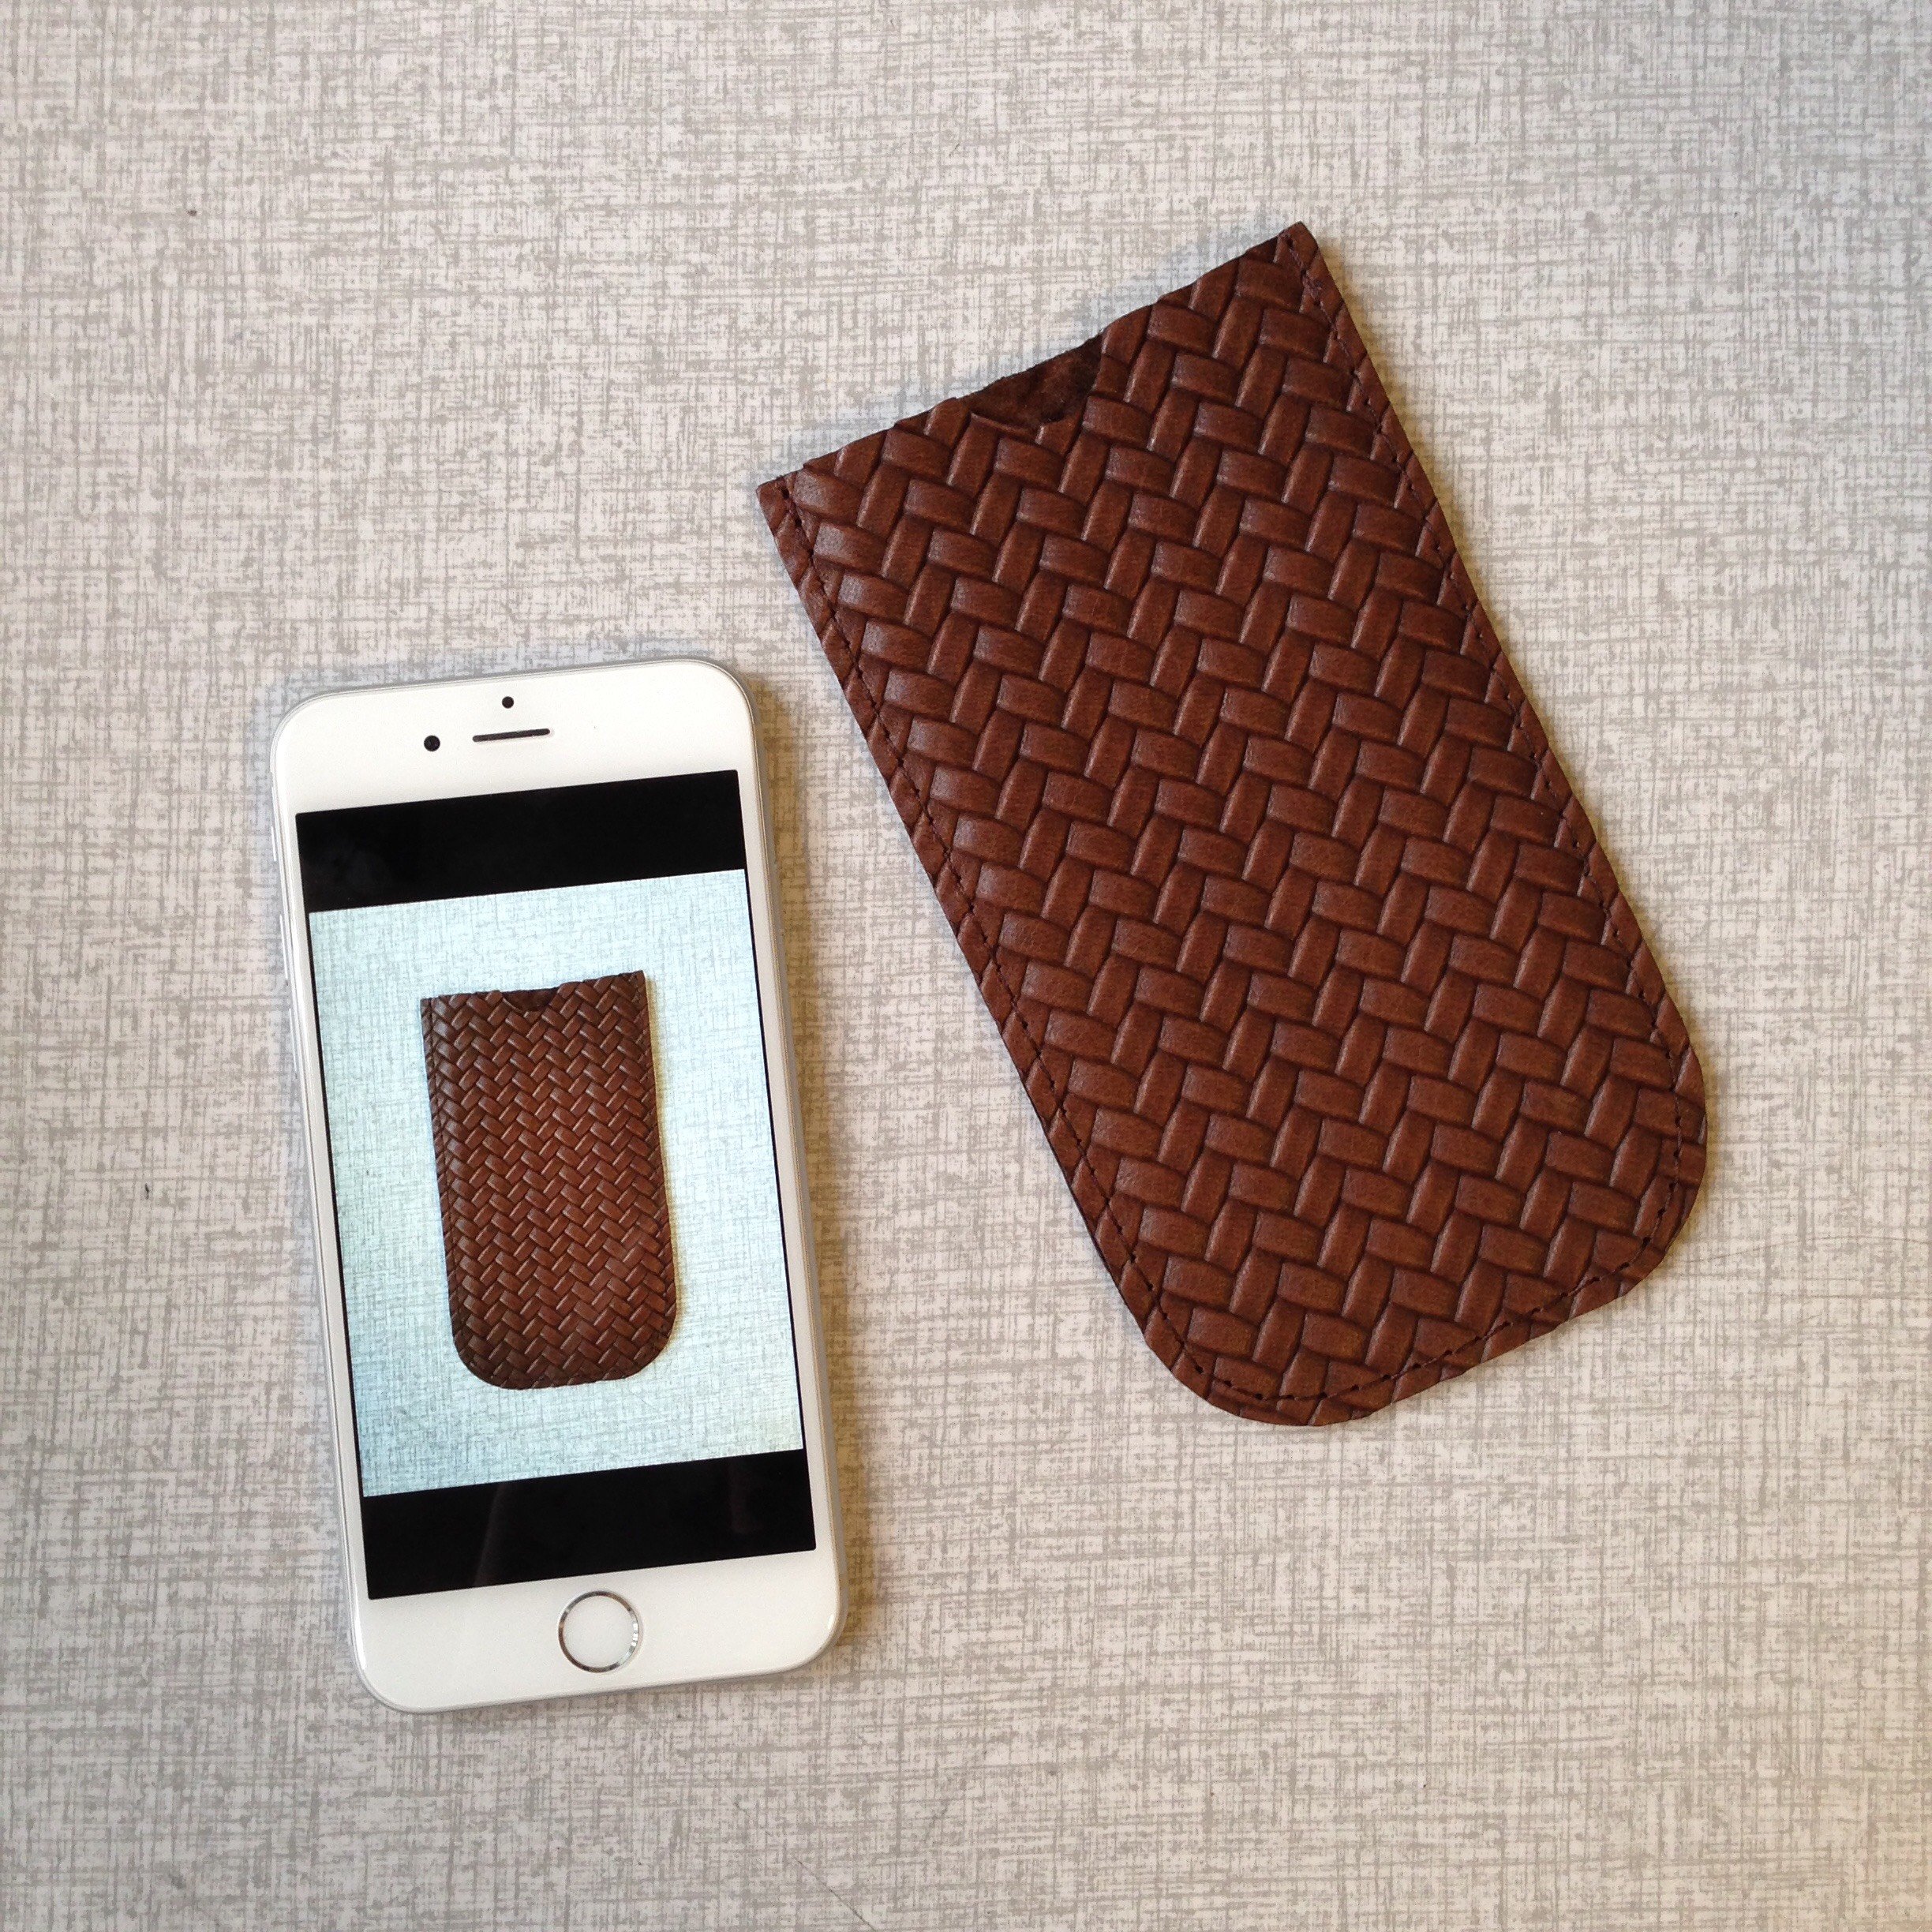 Leather Sleeve for iPhone 6 & 7 - Brown 'Braided' Leather